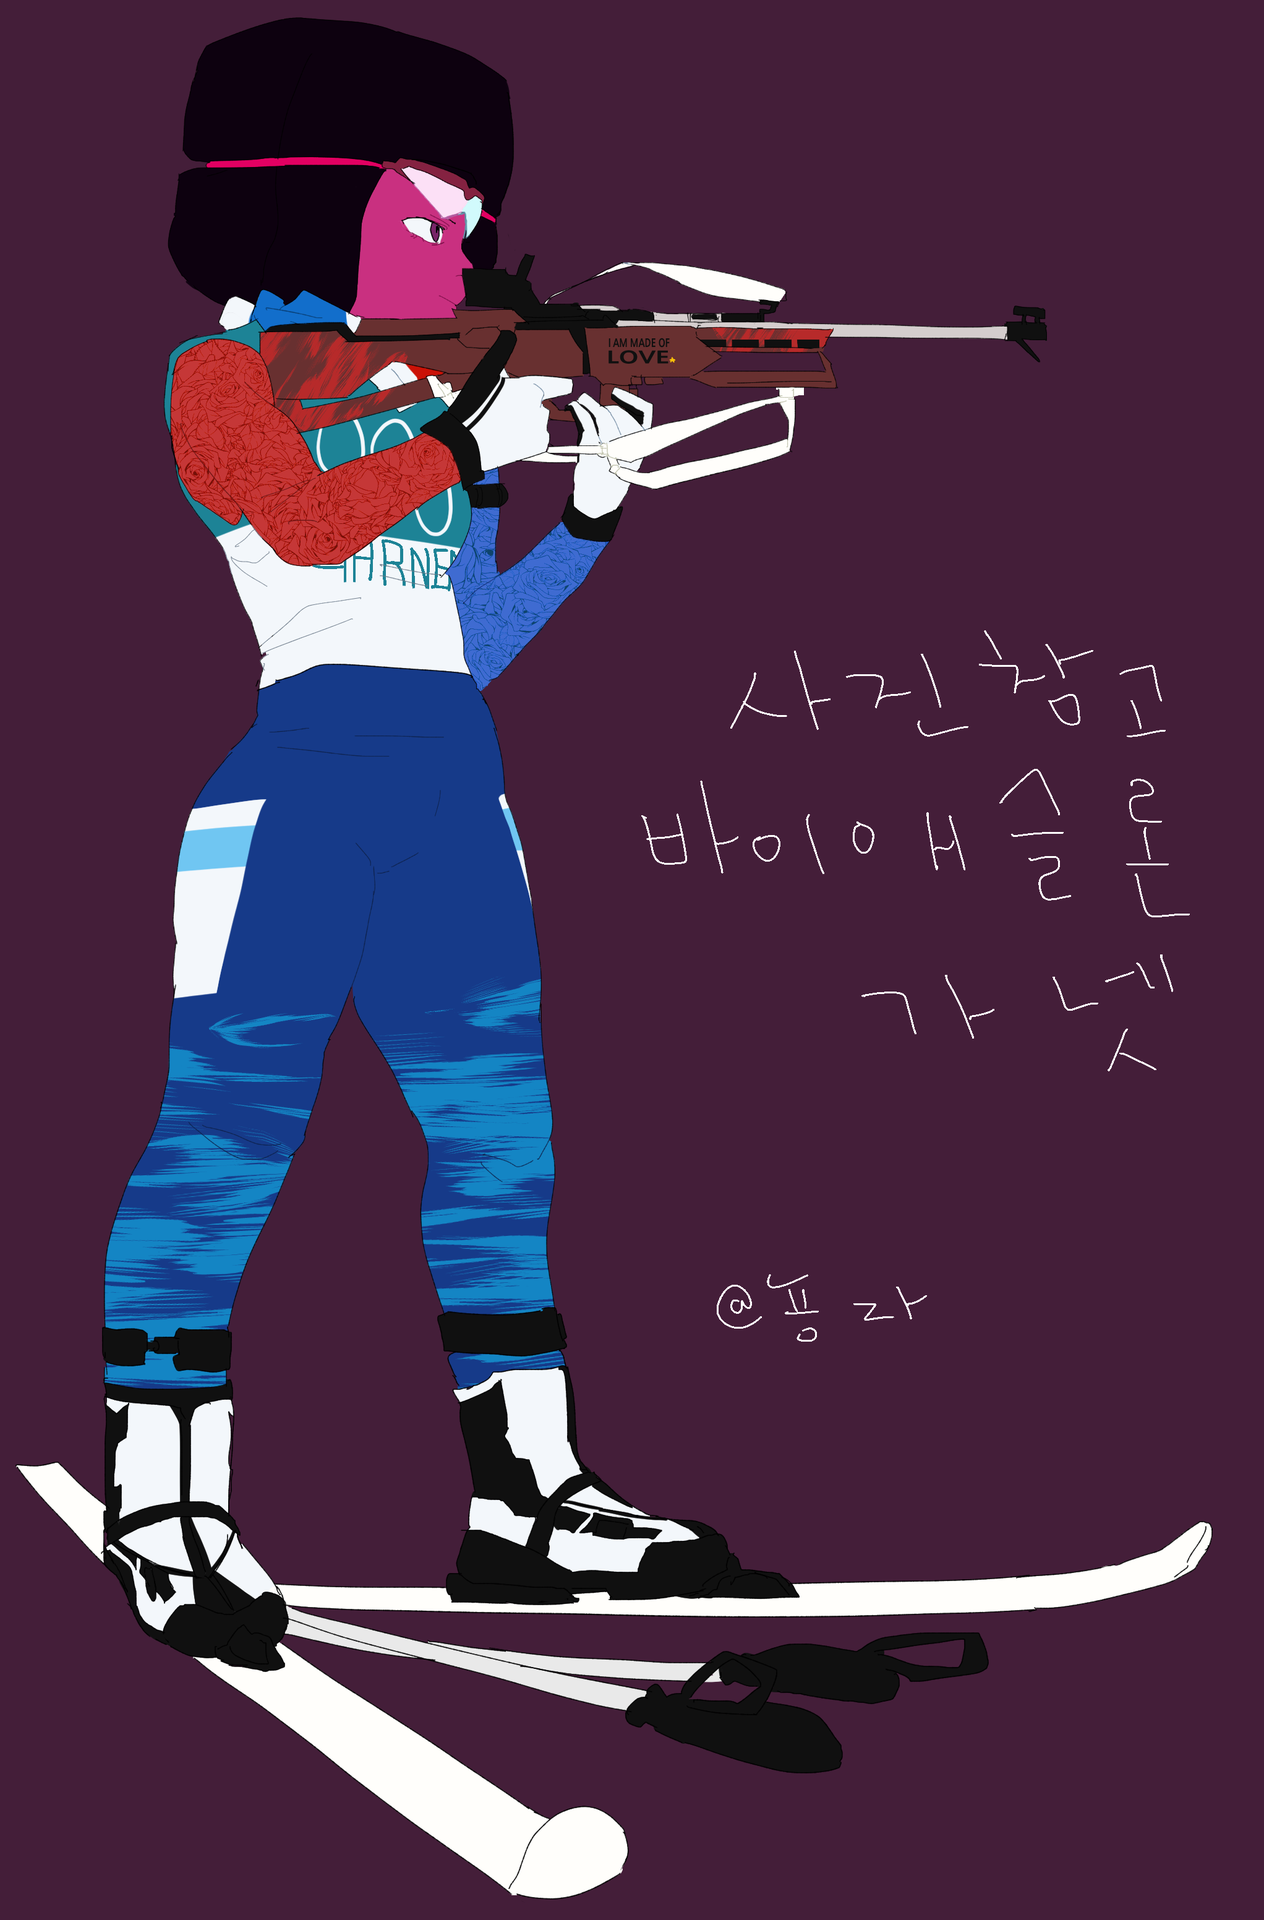 2018 Winter Olympics 🥌🏒🥅⛸️🎿🛷⛷️🏂🏅 There is an Olympic stadium near where I live >:3 haha * I referred to pictures